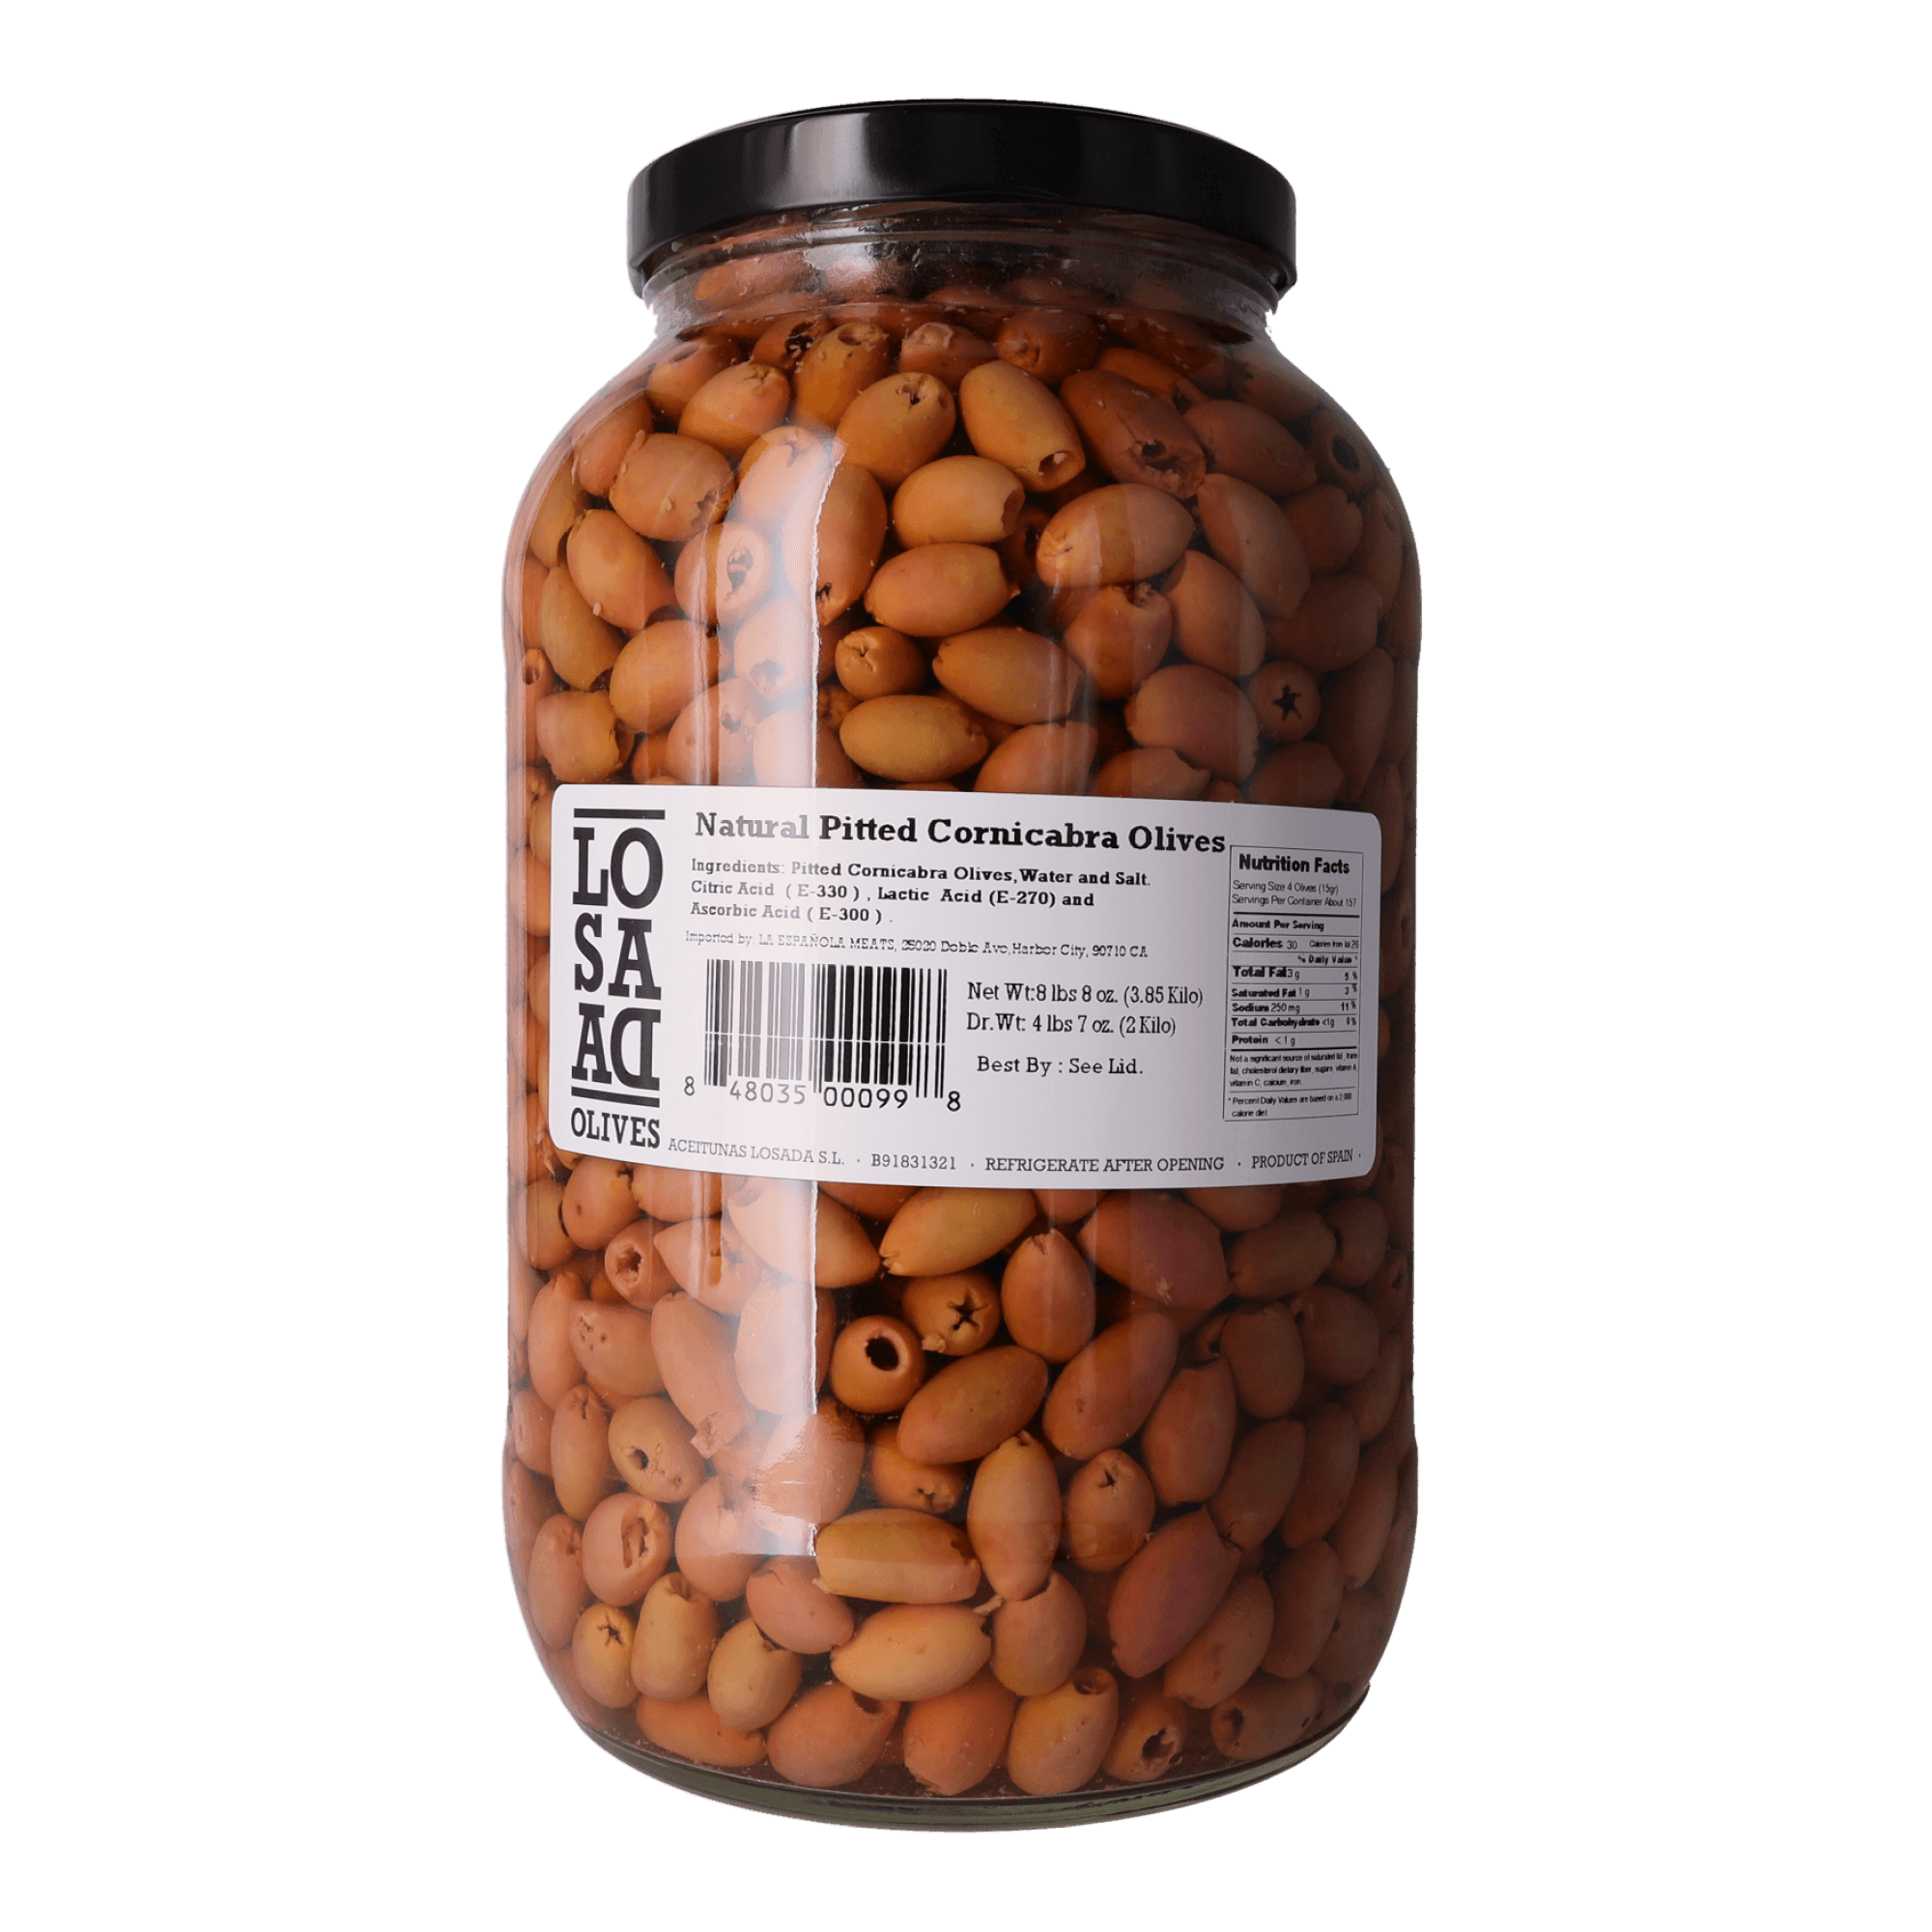 Cornicabra Olives Pitted - Savory Gourmet